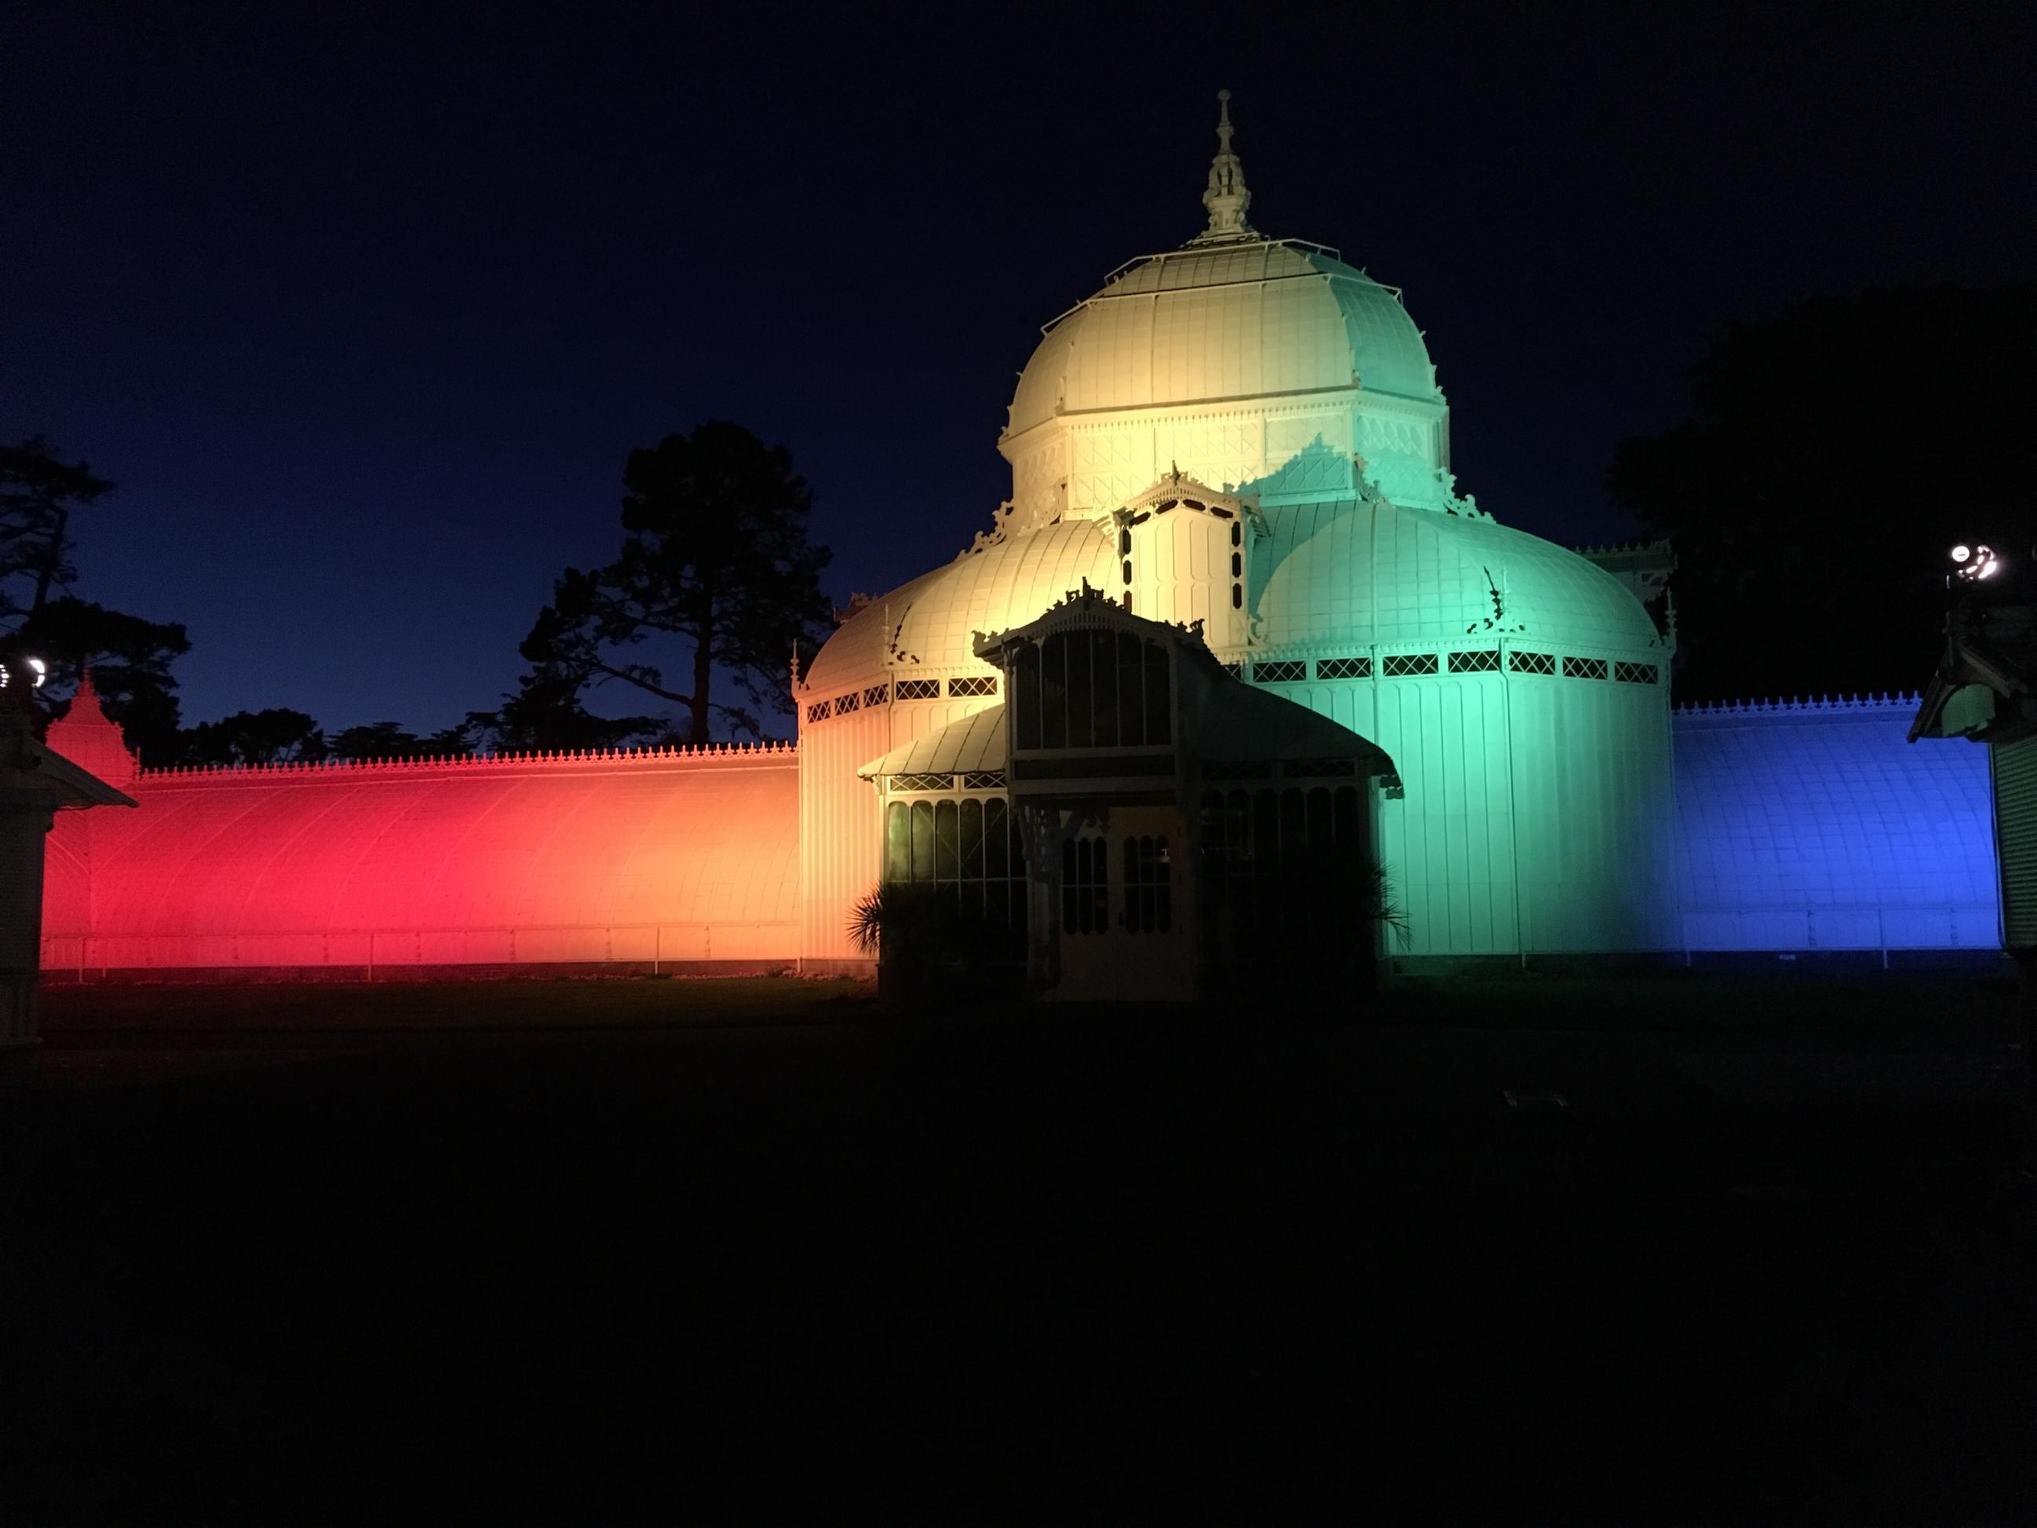 The Conservatory of Flowers has been lit up in rainbow colors in honor of LGBTQ Pride Month